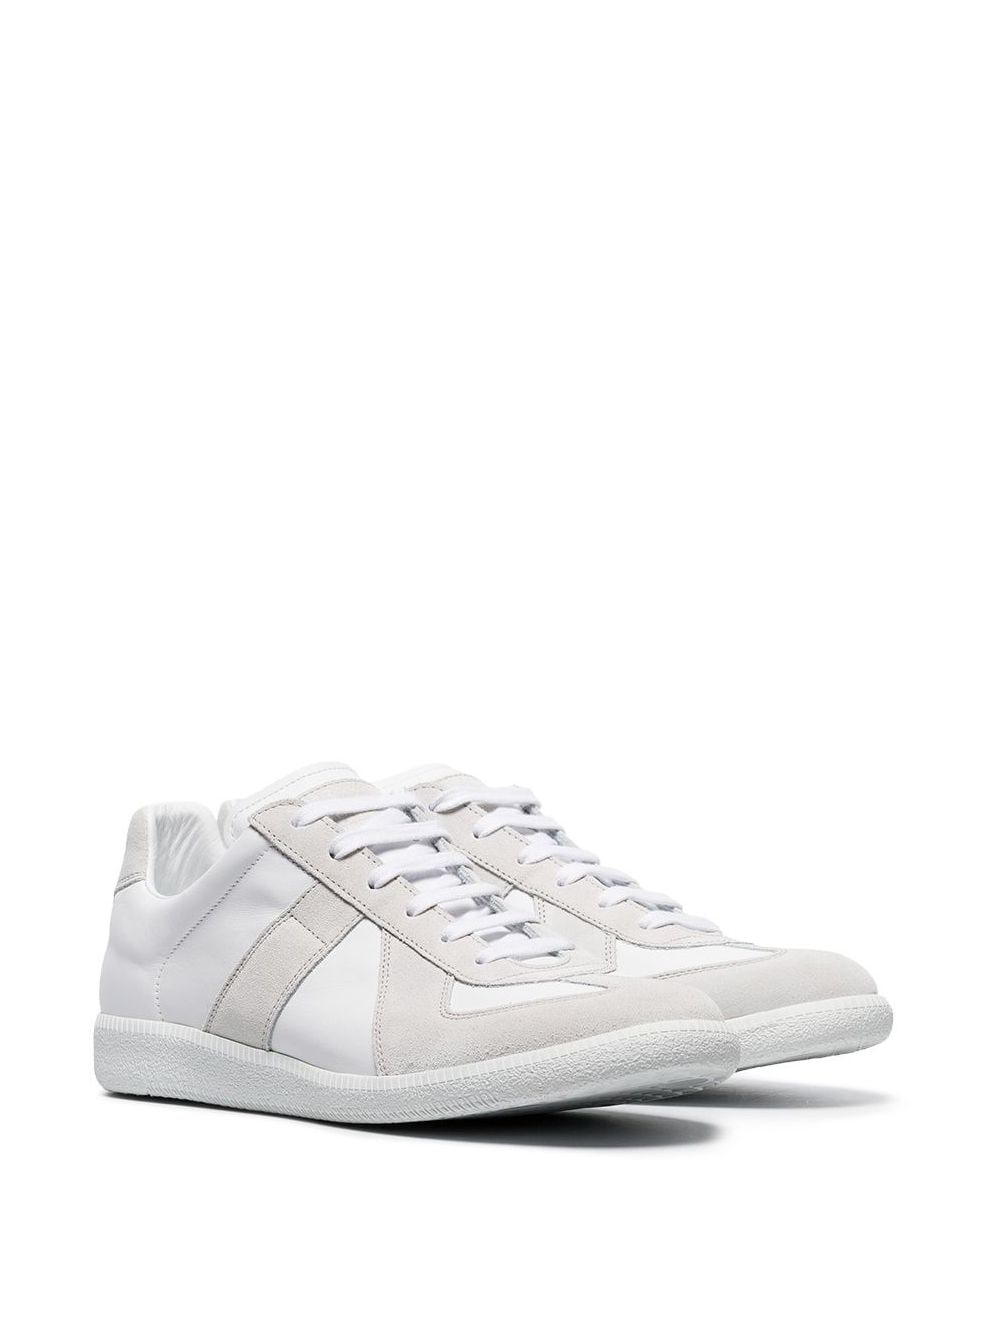 Image 2 of Maison Margiela Replica low-top leather sneakers